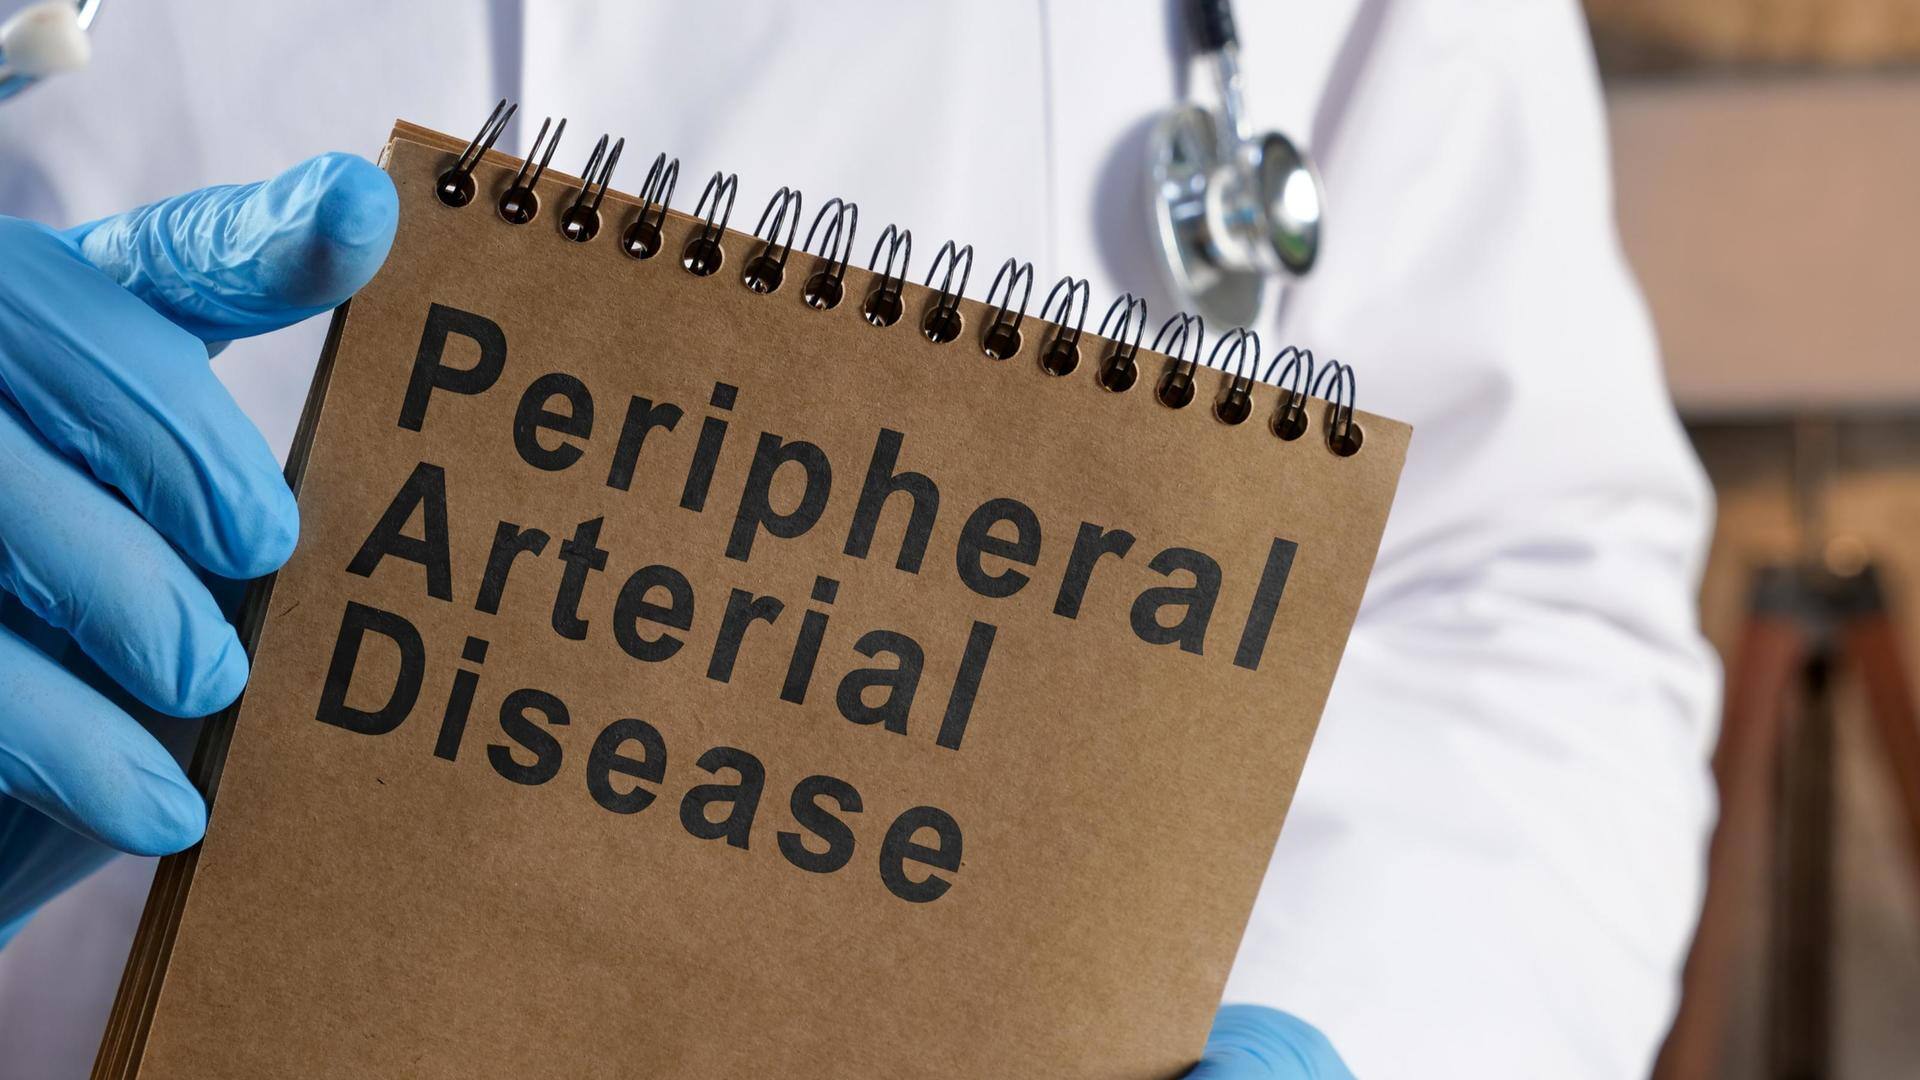 Peripheral arterial disease: Symptoms, causes, and treatment